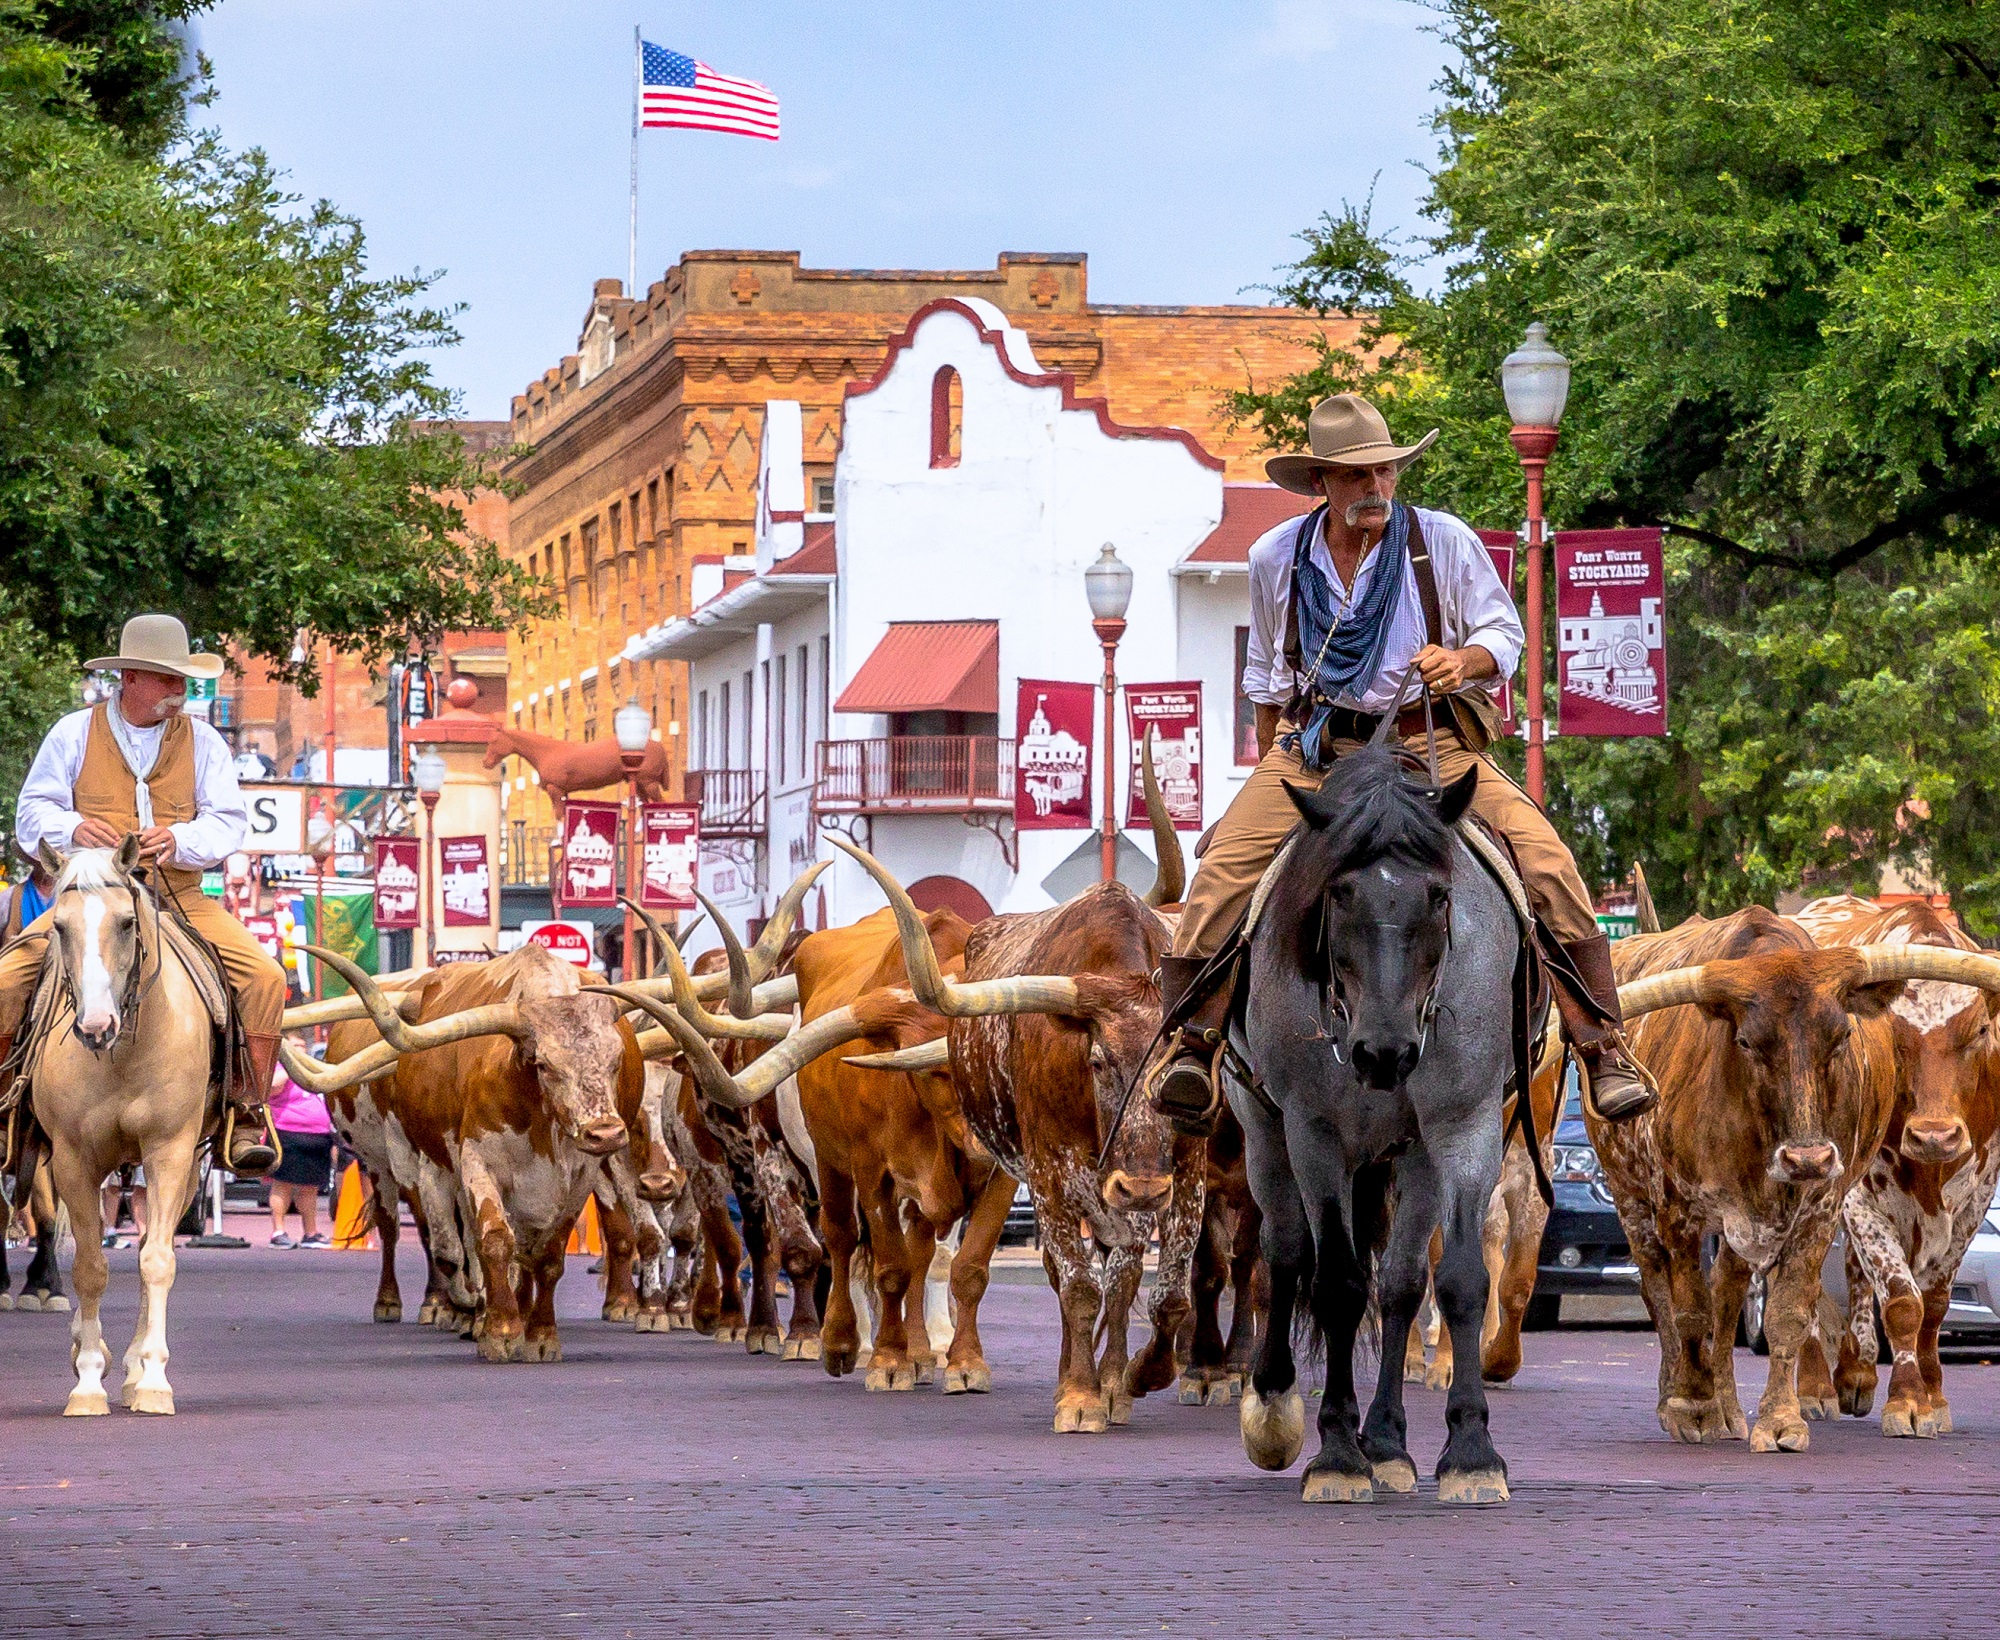 Texas Historical Commission on X: The Fort Worth Stock Yards Company was  incorporated on this day in 1893, building on an existing cattle industry.  Explore Texas' cattle & cowboy heritage:  📷: @